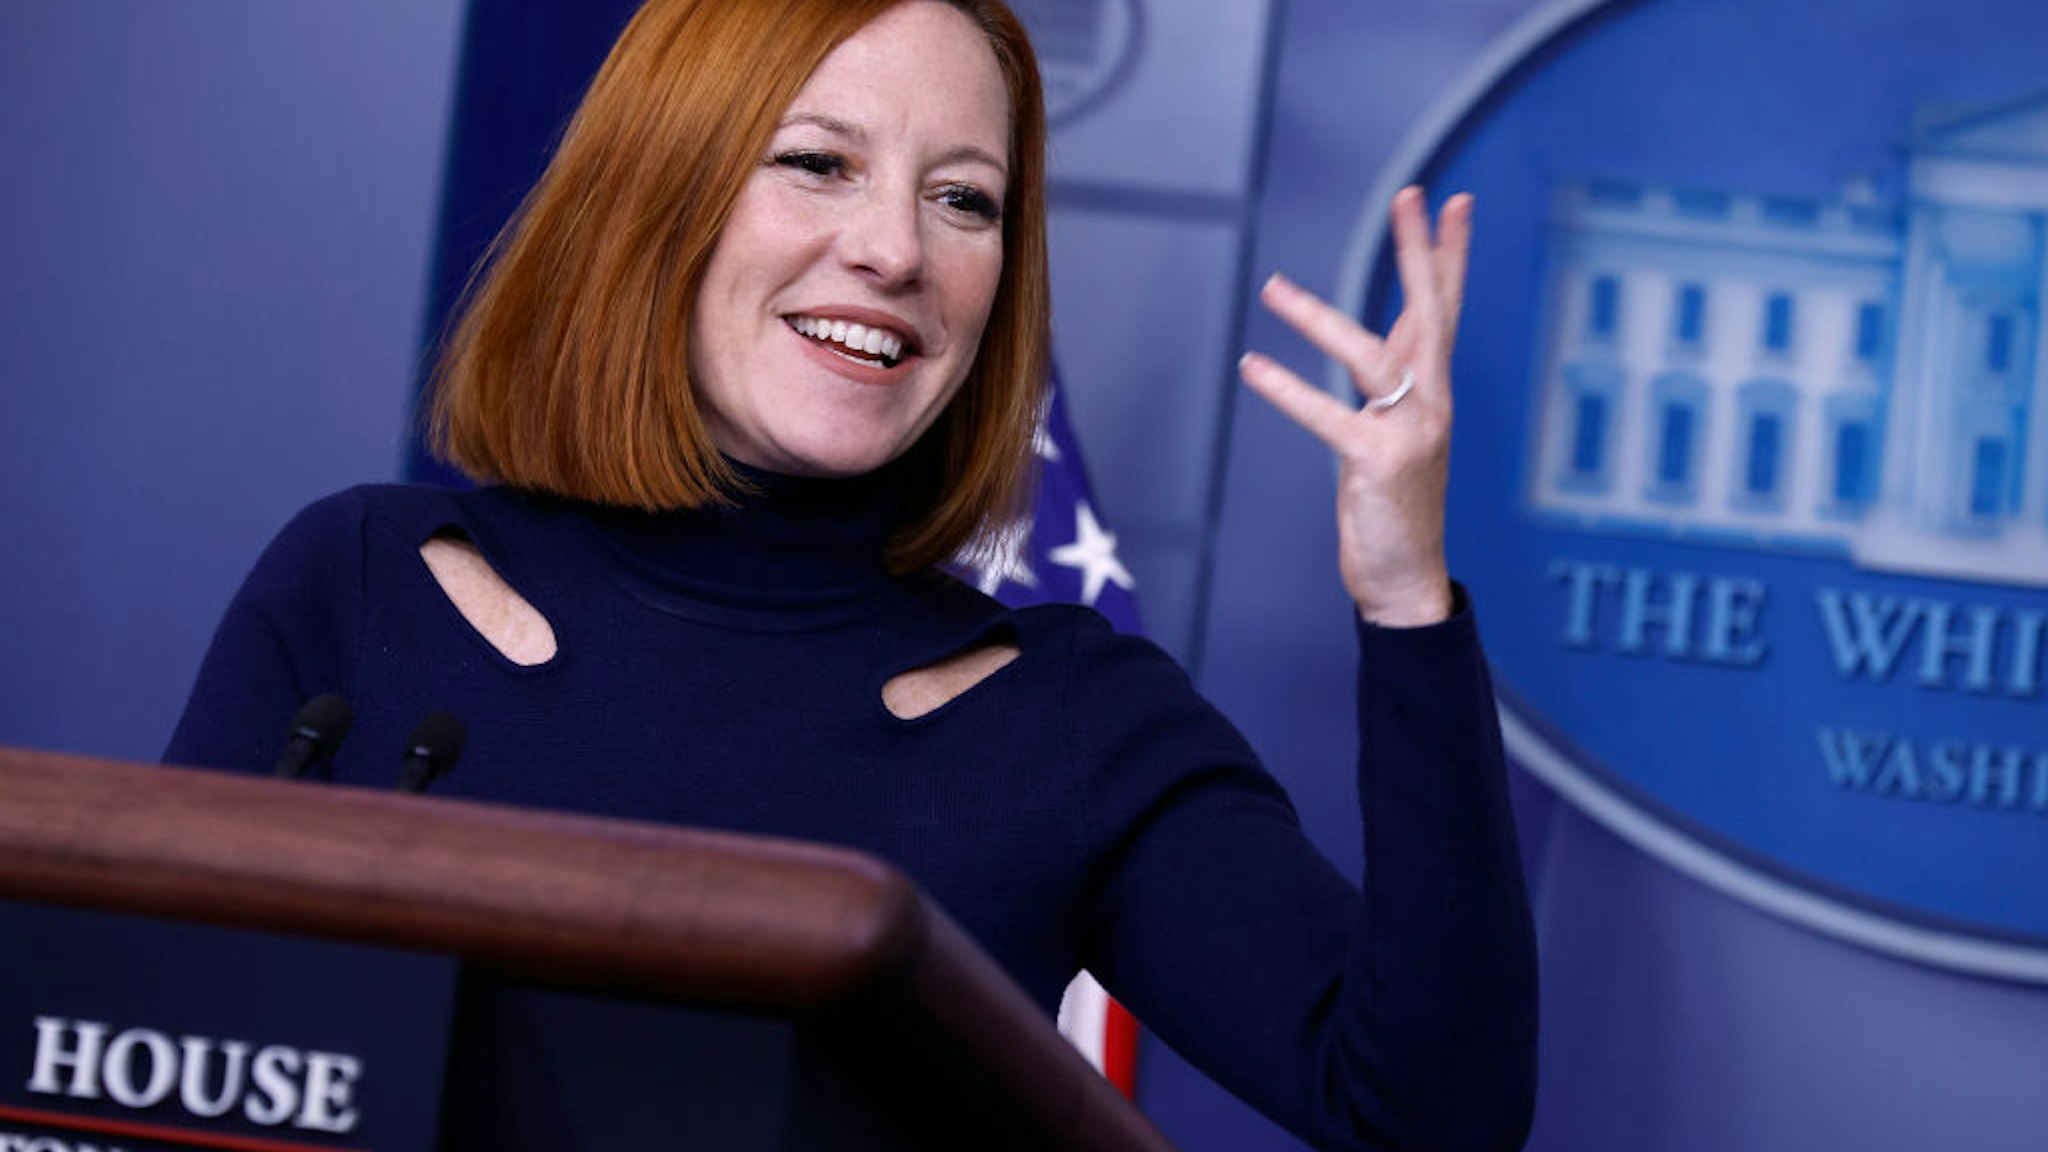 WASHINGTON, DC - DECEMBER 10: White House Press Secretary Jen Psaki speaks to reporters in the Brady Press Briefing Room at the White House on December 10, 2021 in Washington, DC. Psaki expanded on President Joe Biden's remarks about the economy and his belief that consumer prices and other costs will be going down as inflation eases next year. (Photo by Chip Somodevilla/Getty Images)